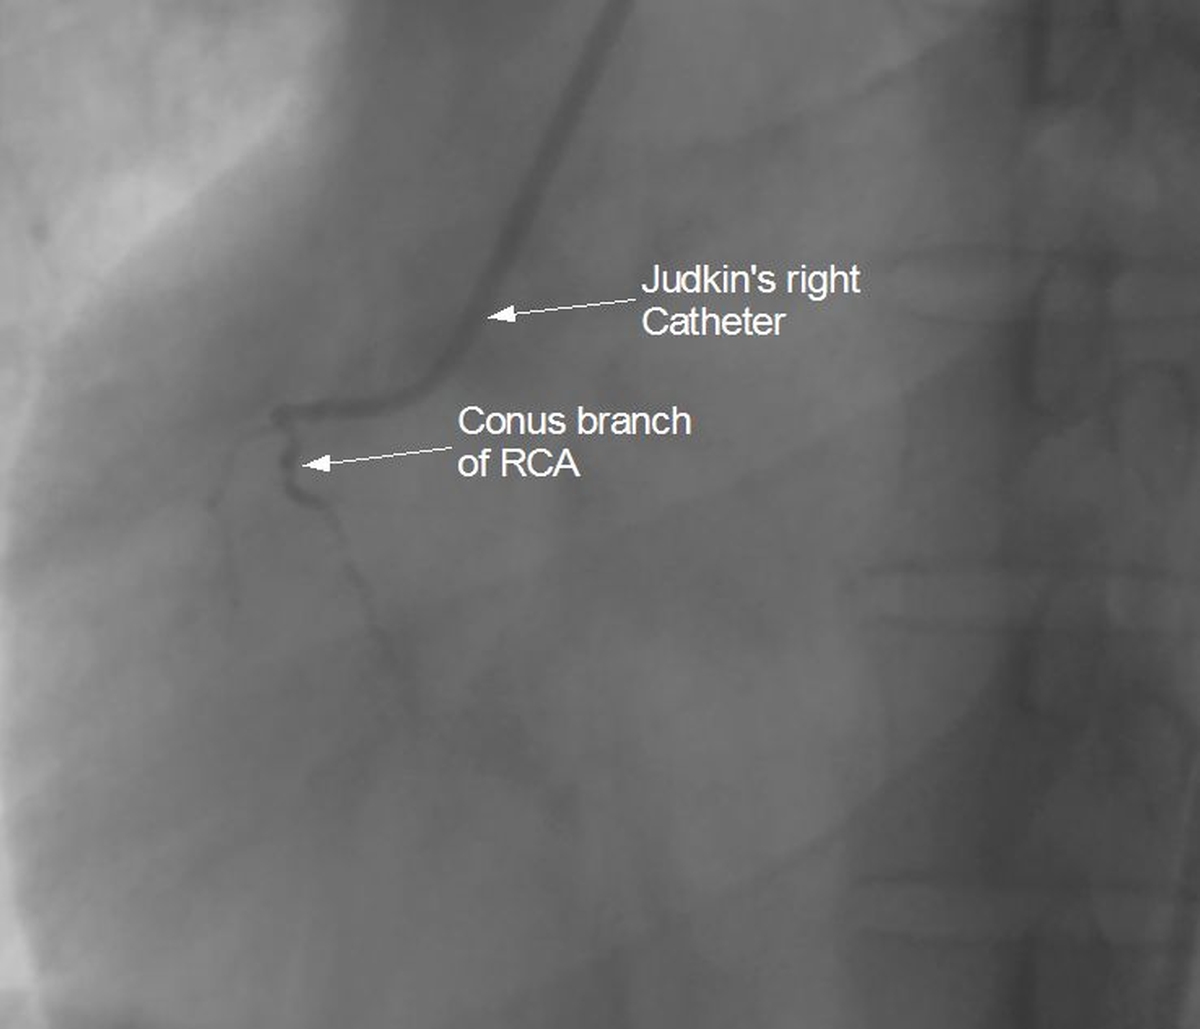 Catheter slipping into conus branch during right coronary angiography